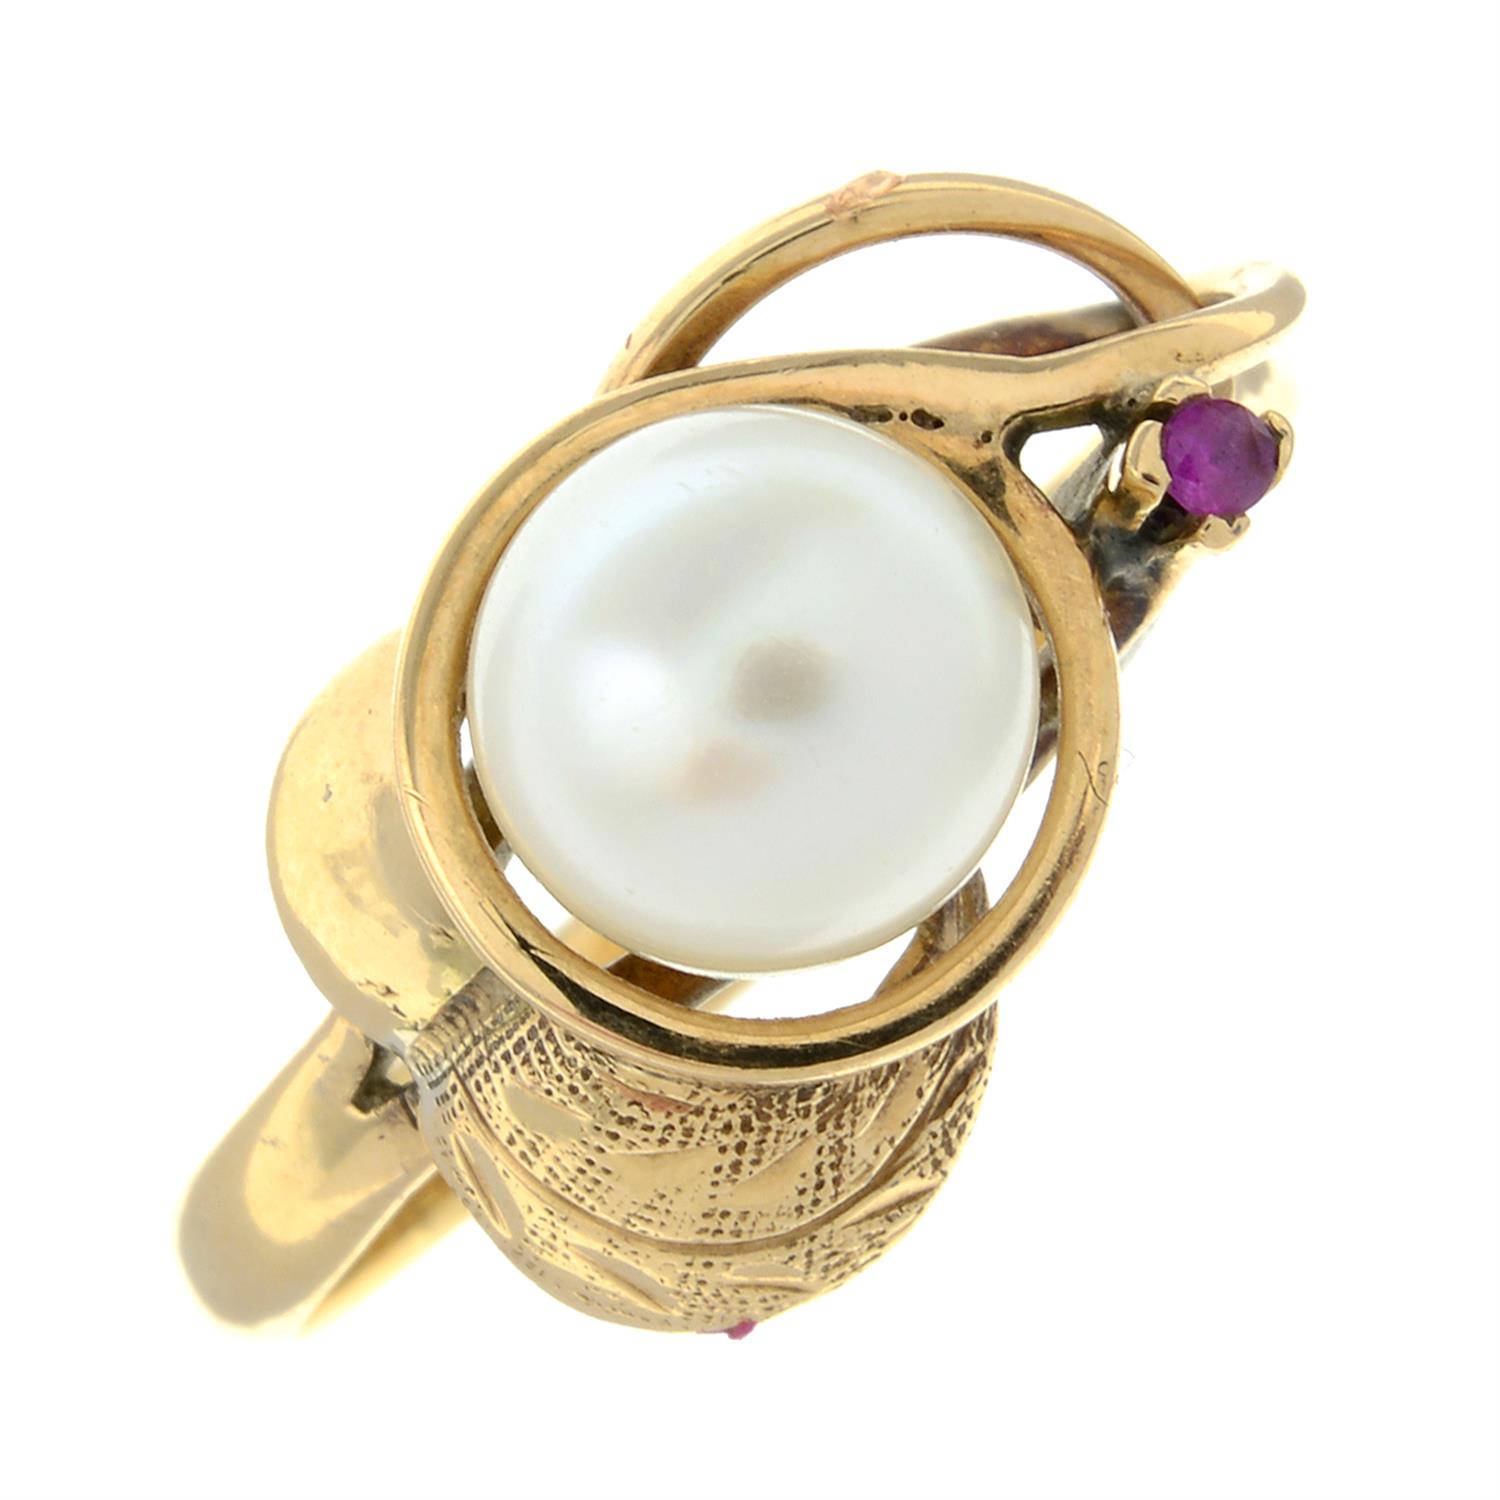 Cultured pearl and ruby dress ring.